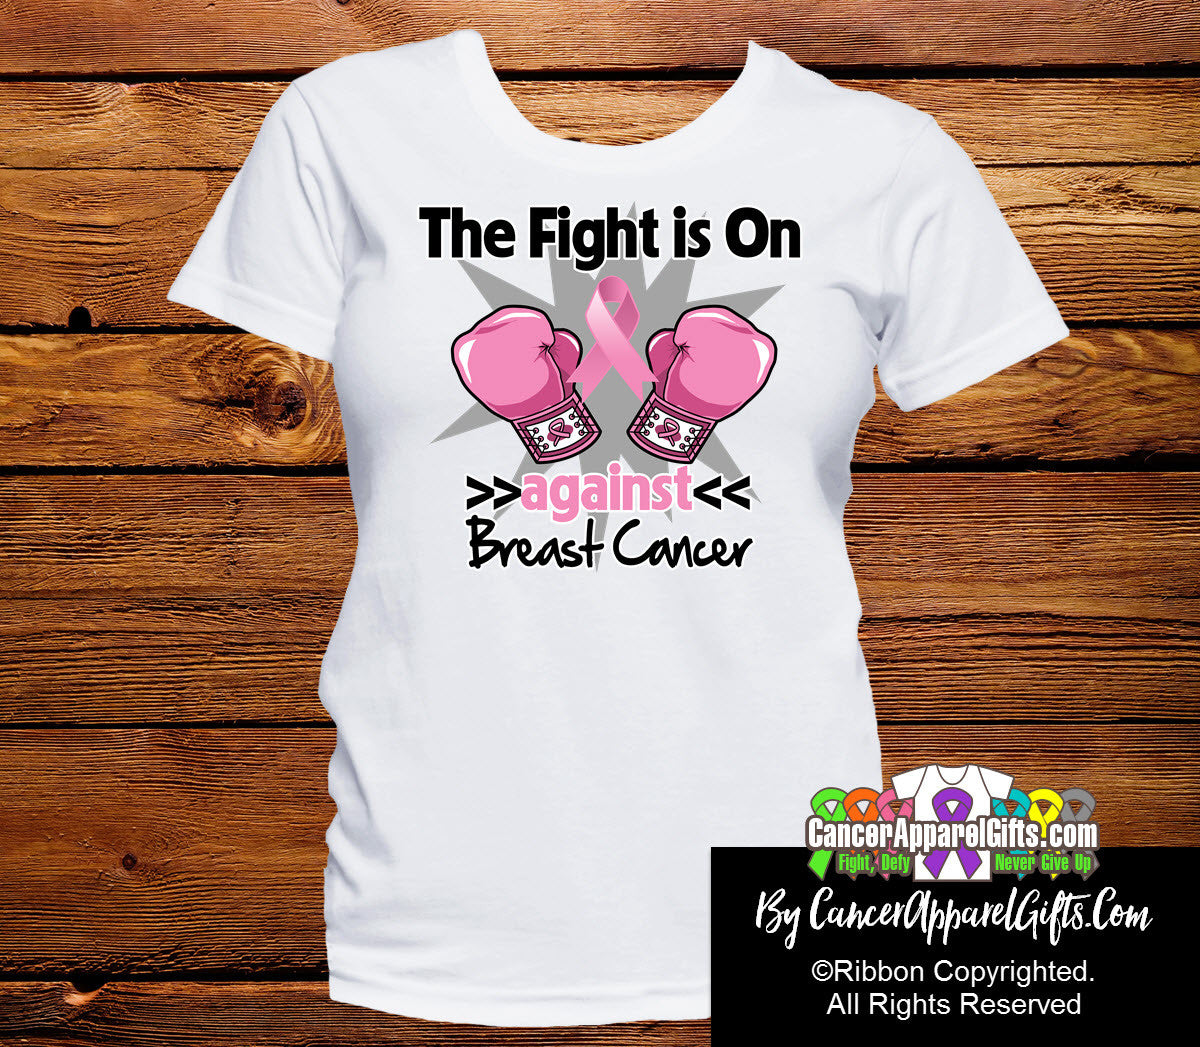 Breast Cancer The Fight is On Ladies Shirts